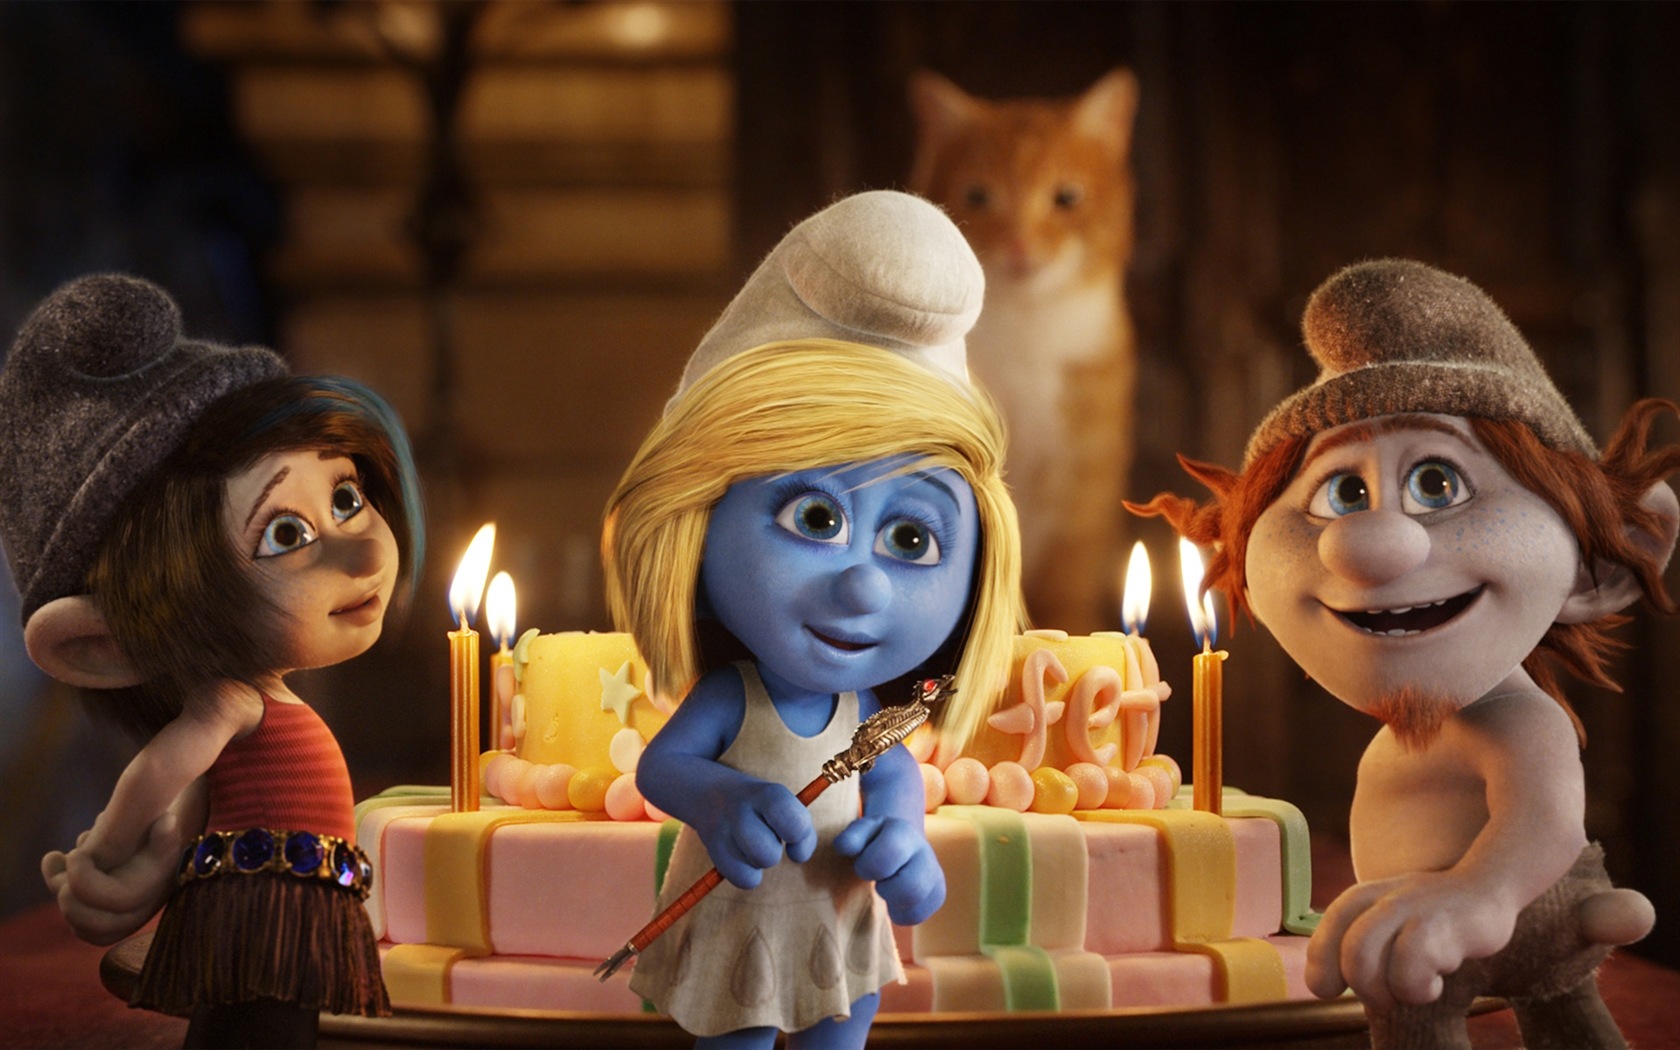 The Smurfs 2 HD movie wallpapers #2 - 1680x1050